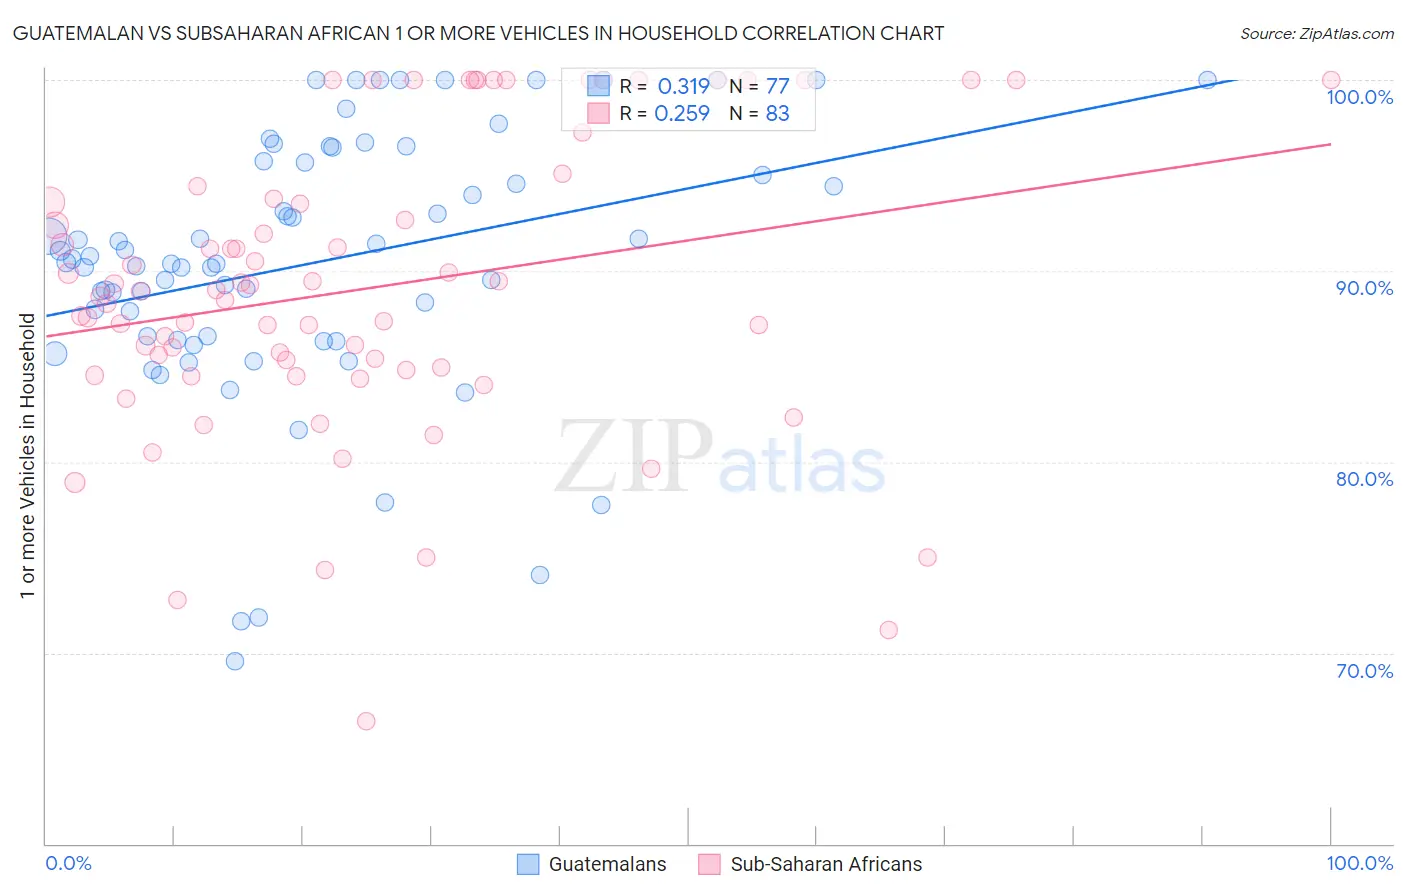 Guatemalan vs Subsaharan African 1 or more Vehicles in Household